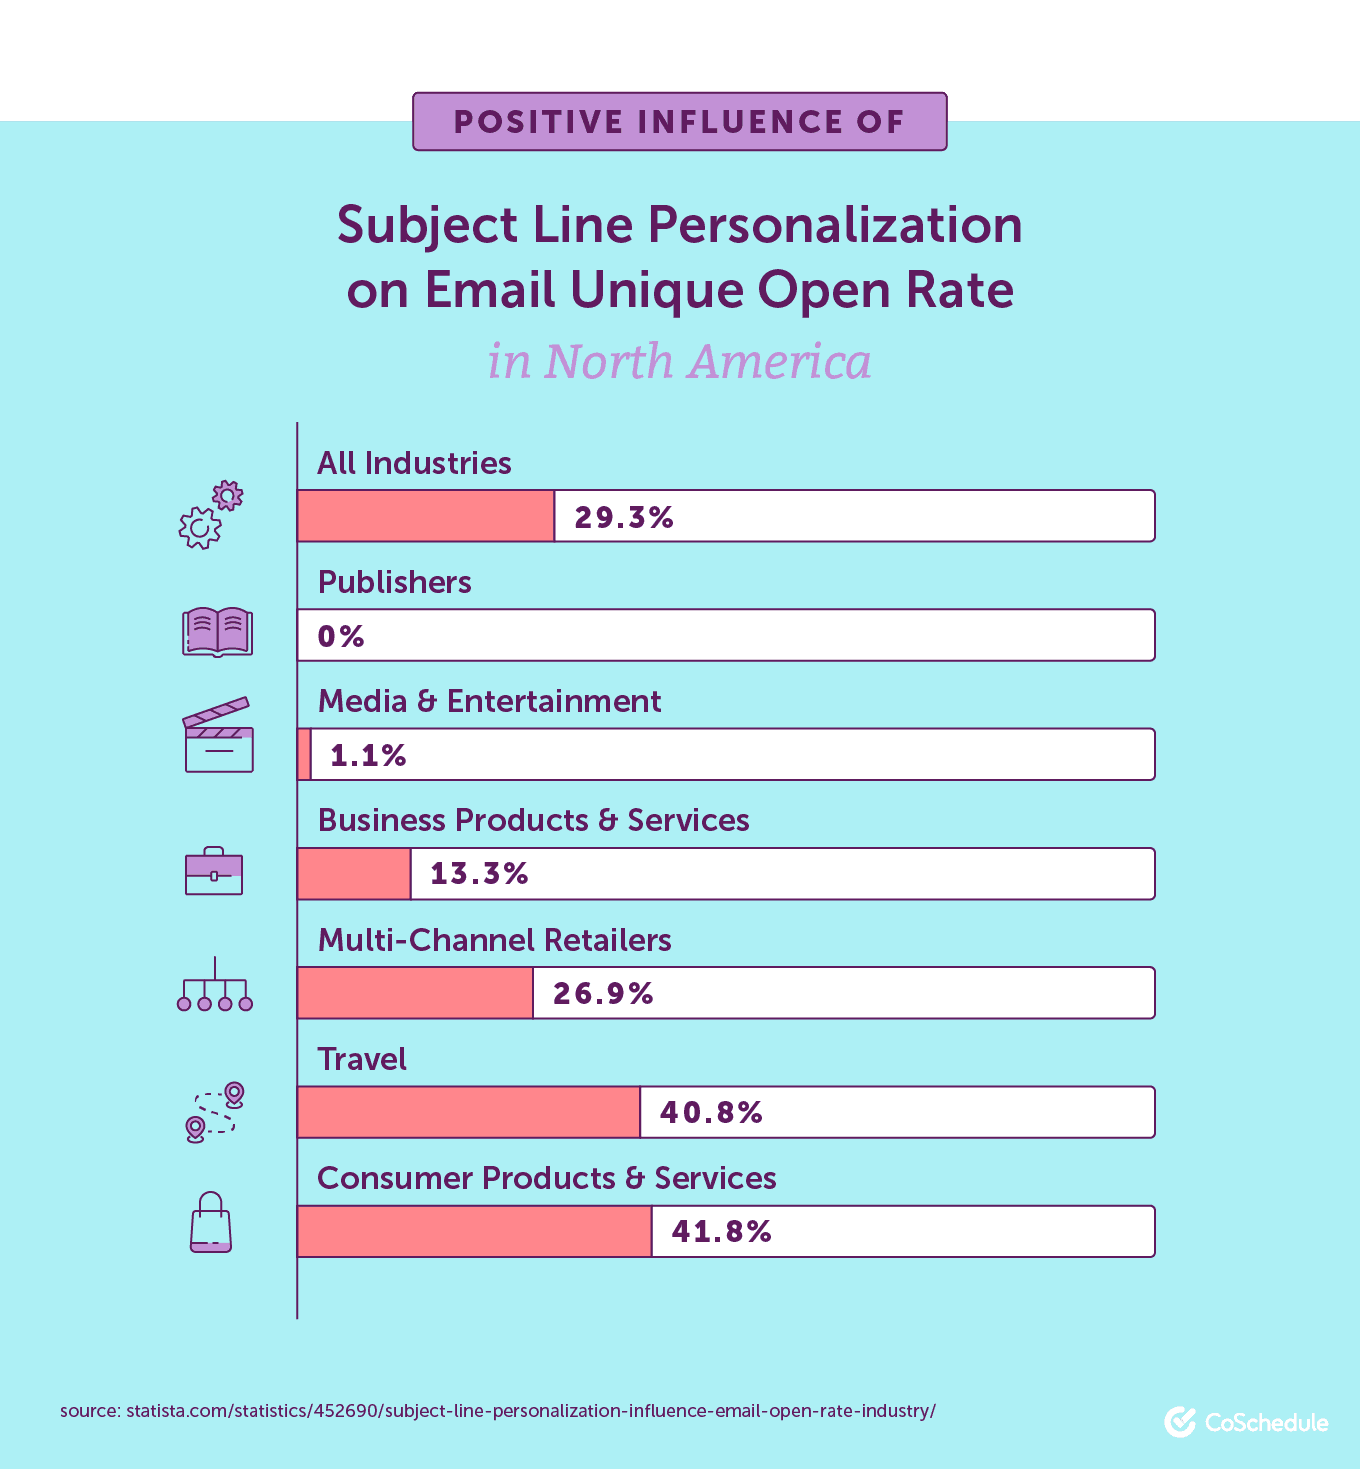 Positive Influence of Subject Line Personalization on Email Unique Open Rate in North America